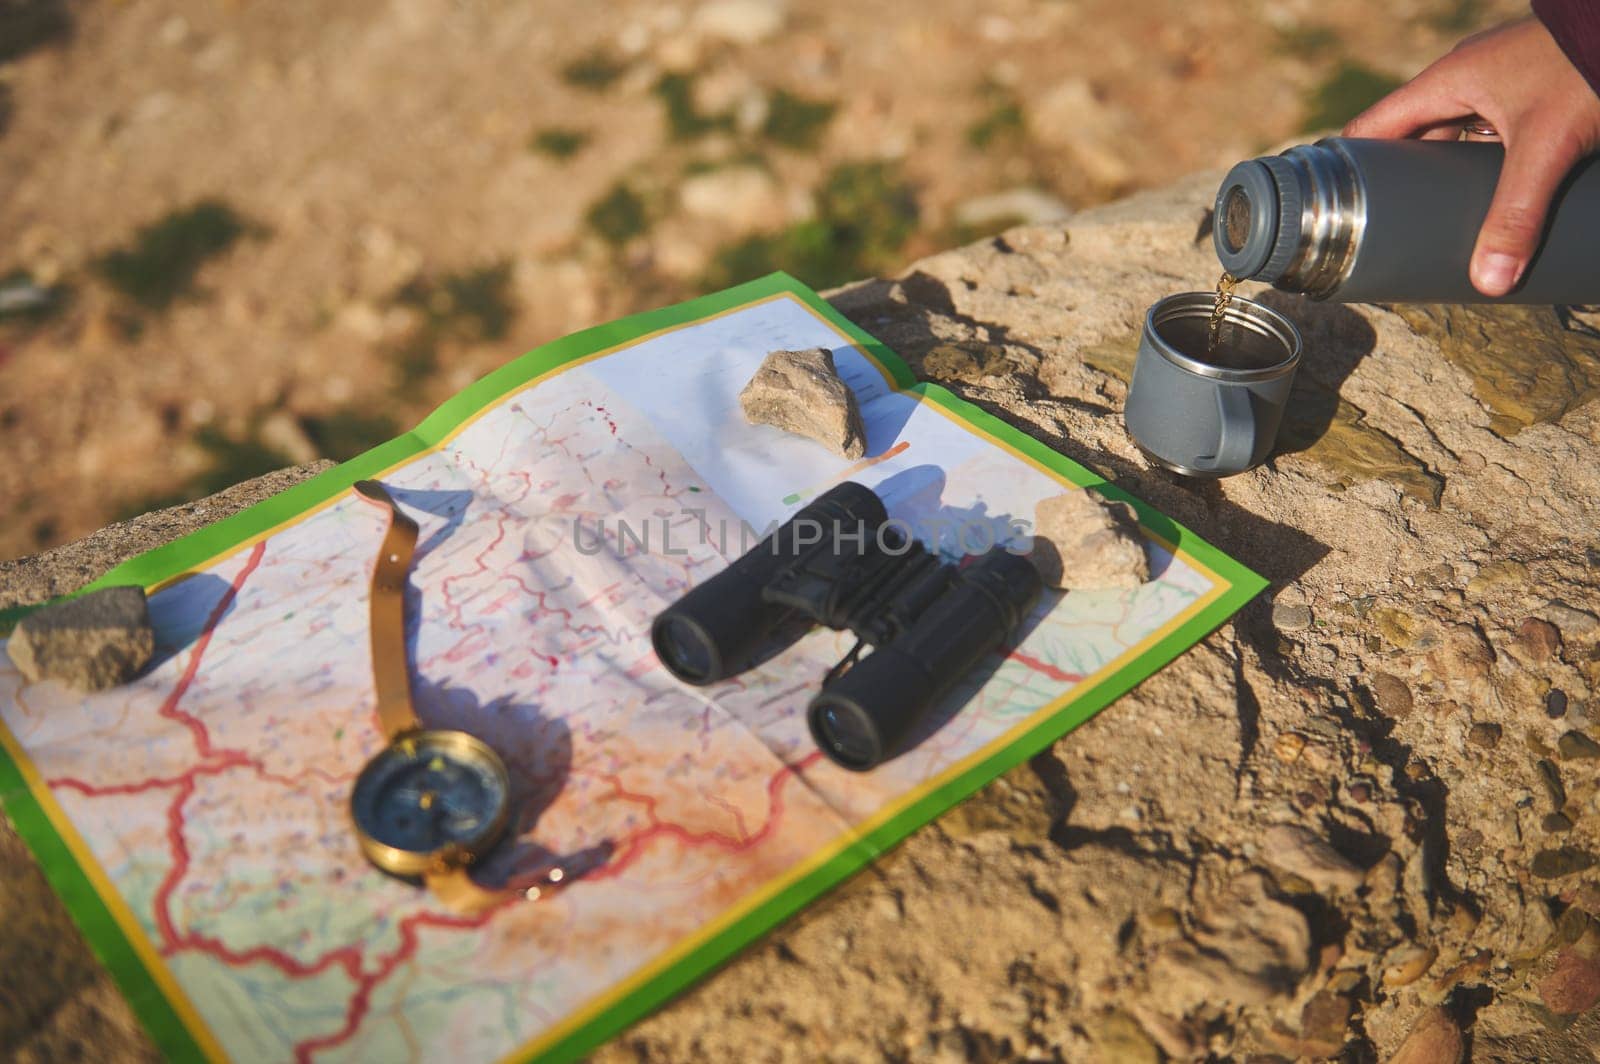 Details on tourist hand holding thermos flask and pouring hot tea drink into a stainless steel mag, standing on a rock near a map, compass and binoculars. Active lifestyle. Recreation. Tourism concept